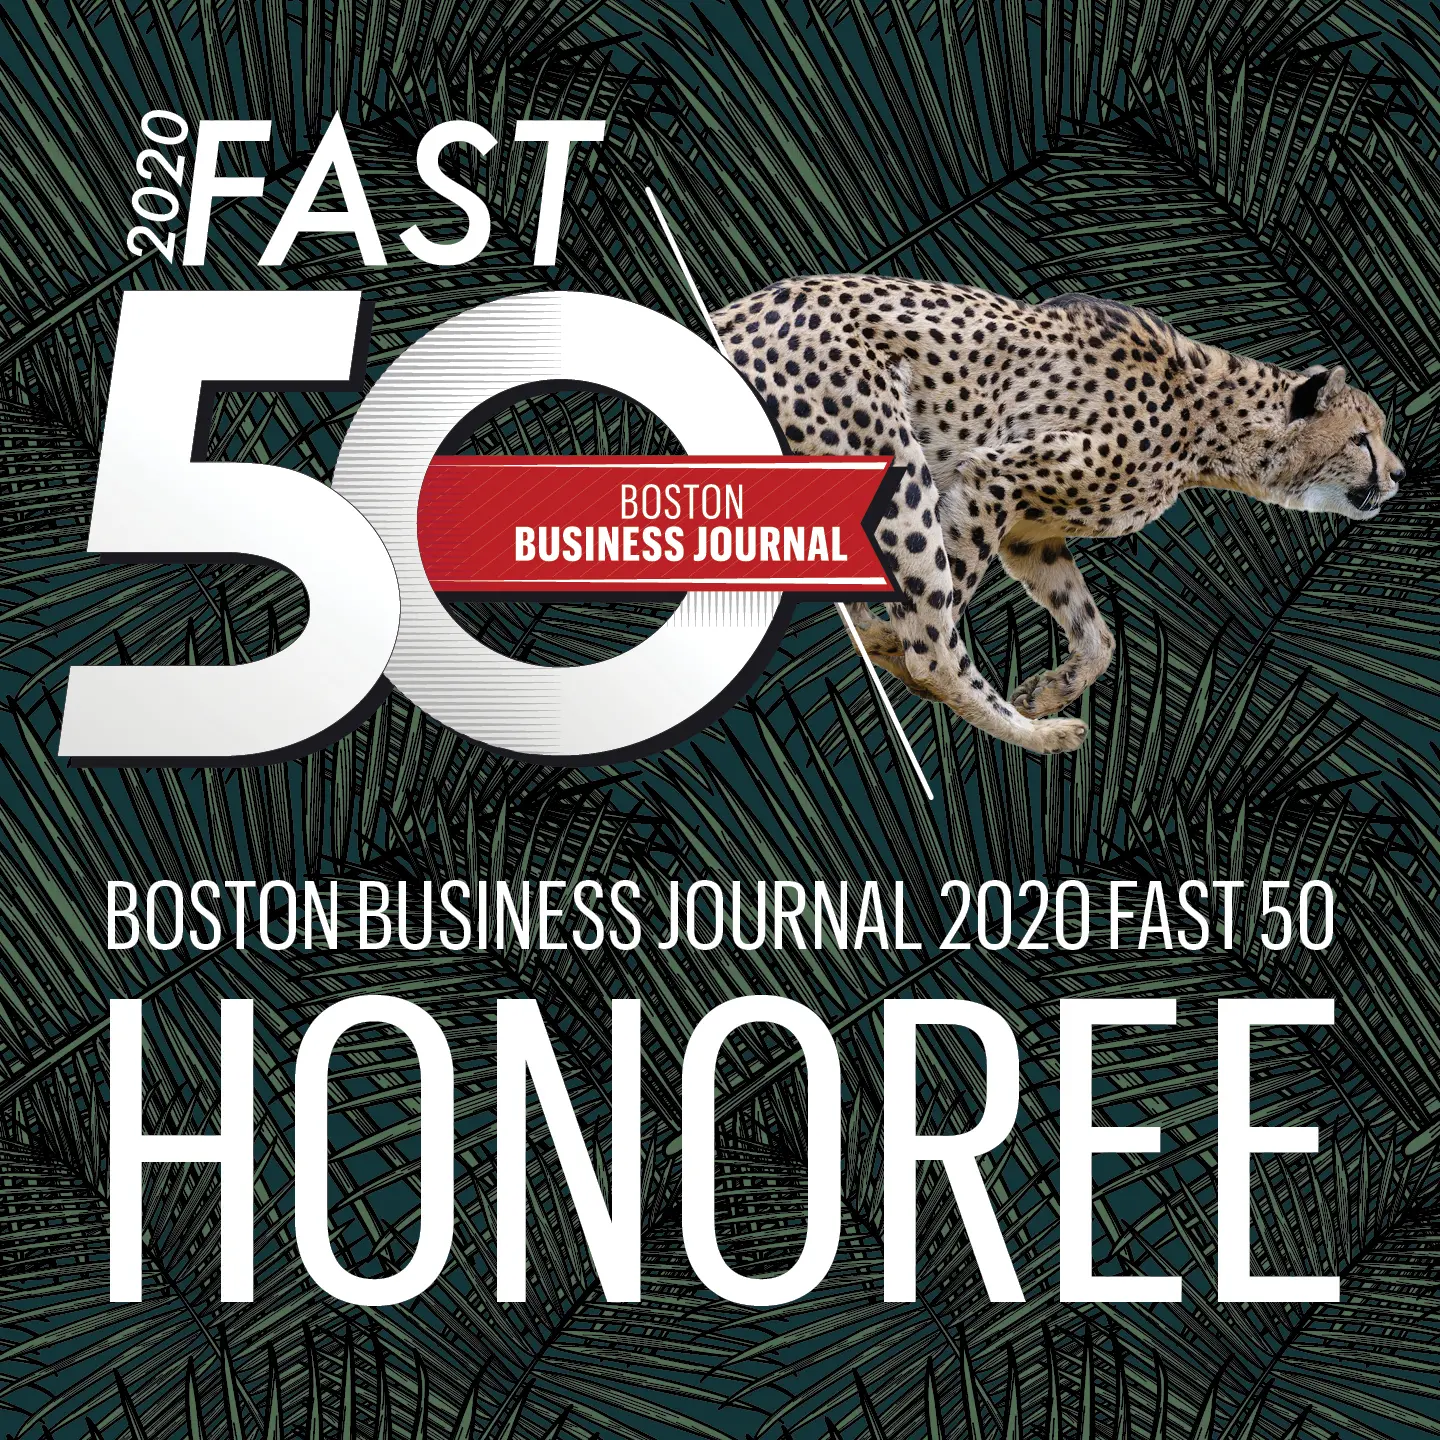 2020 Fast 50 graphic with jaguar